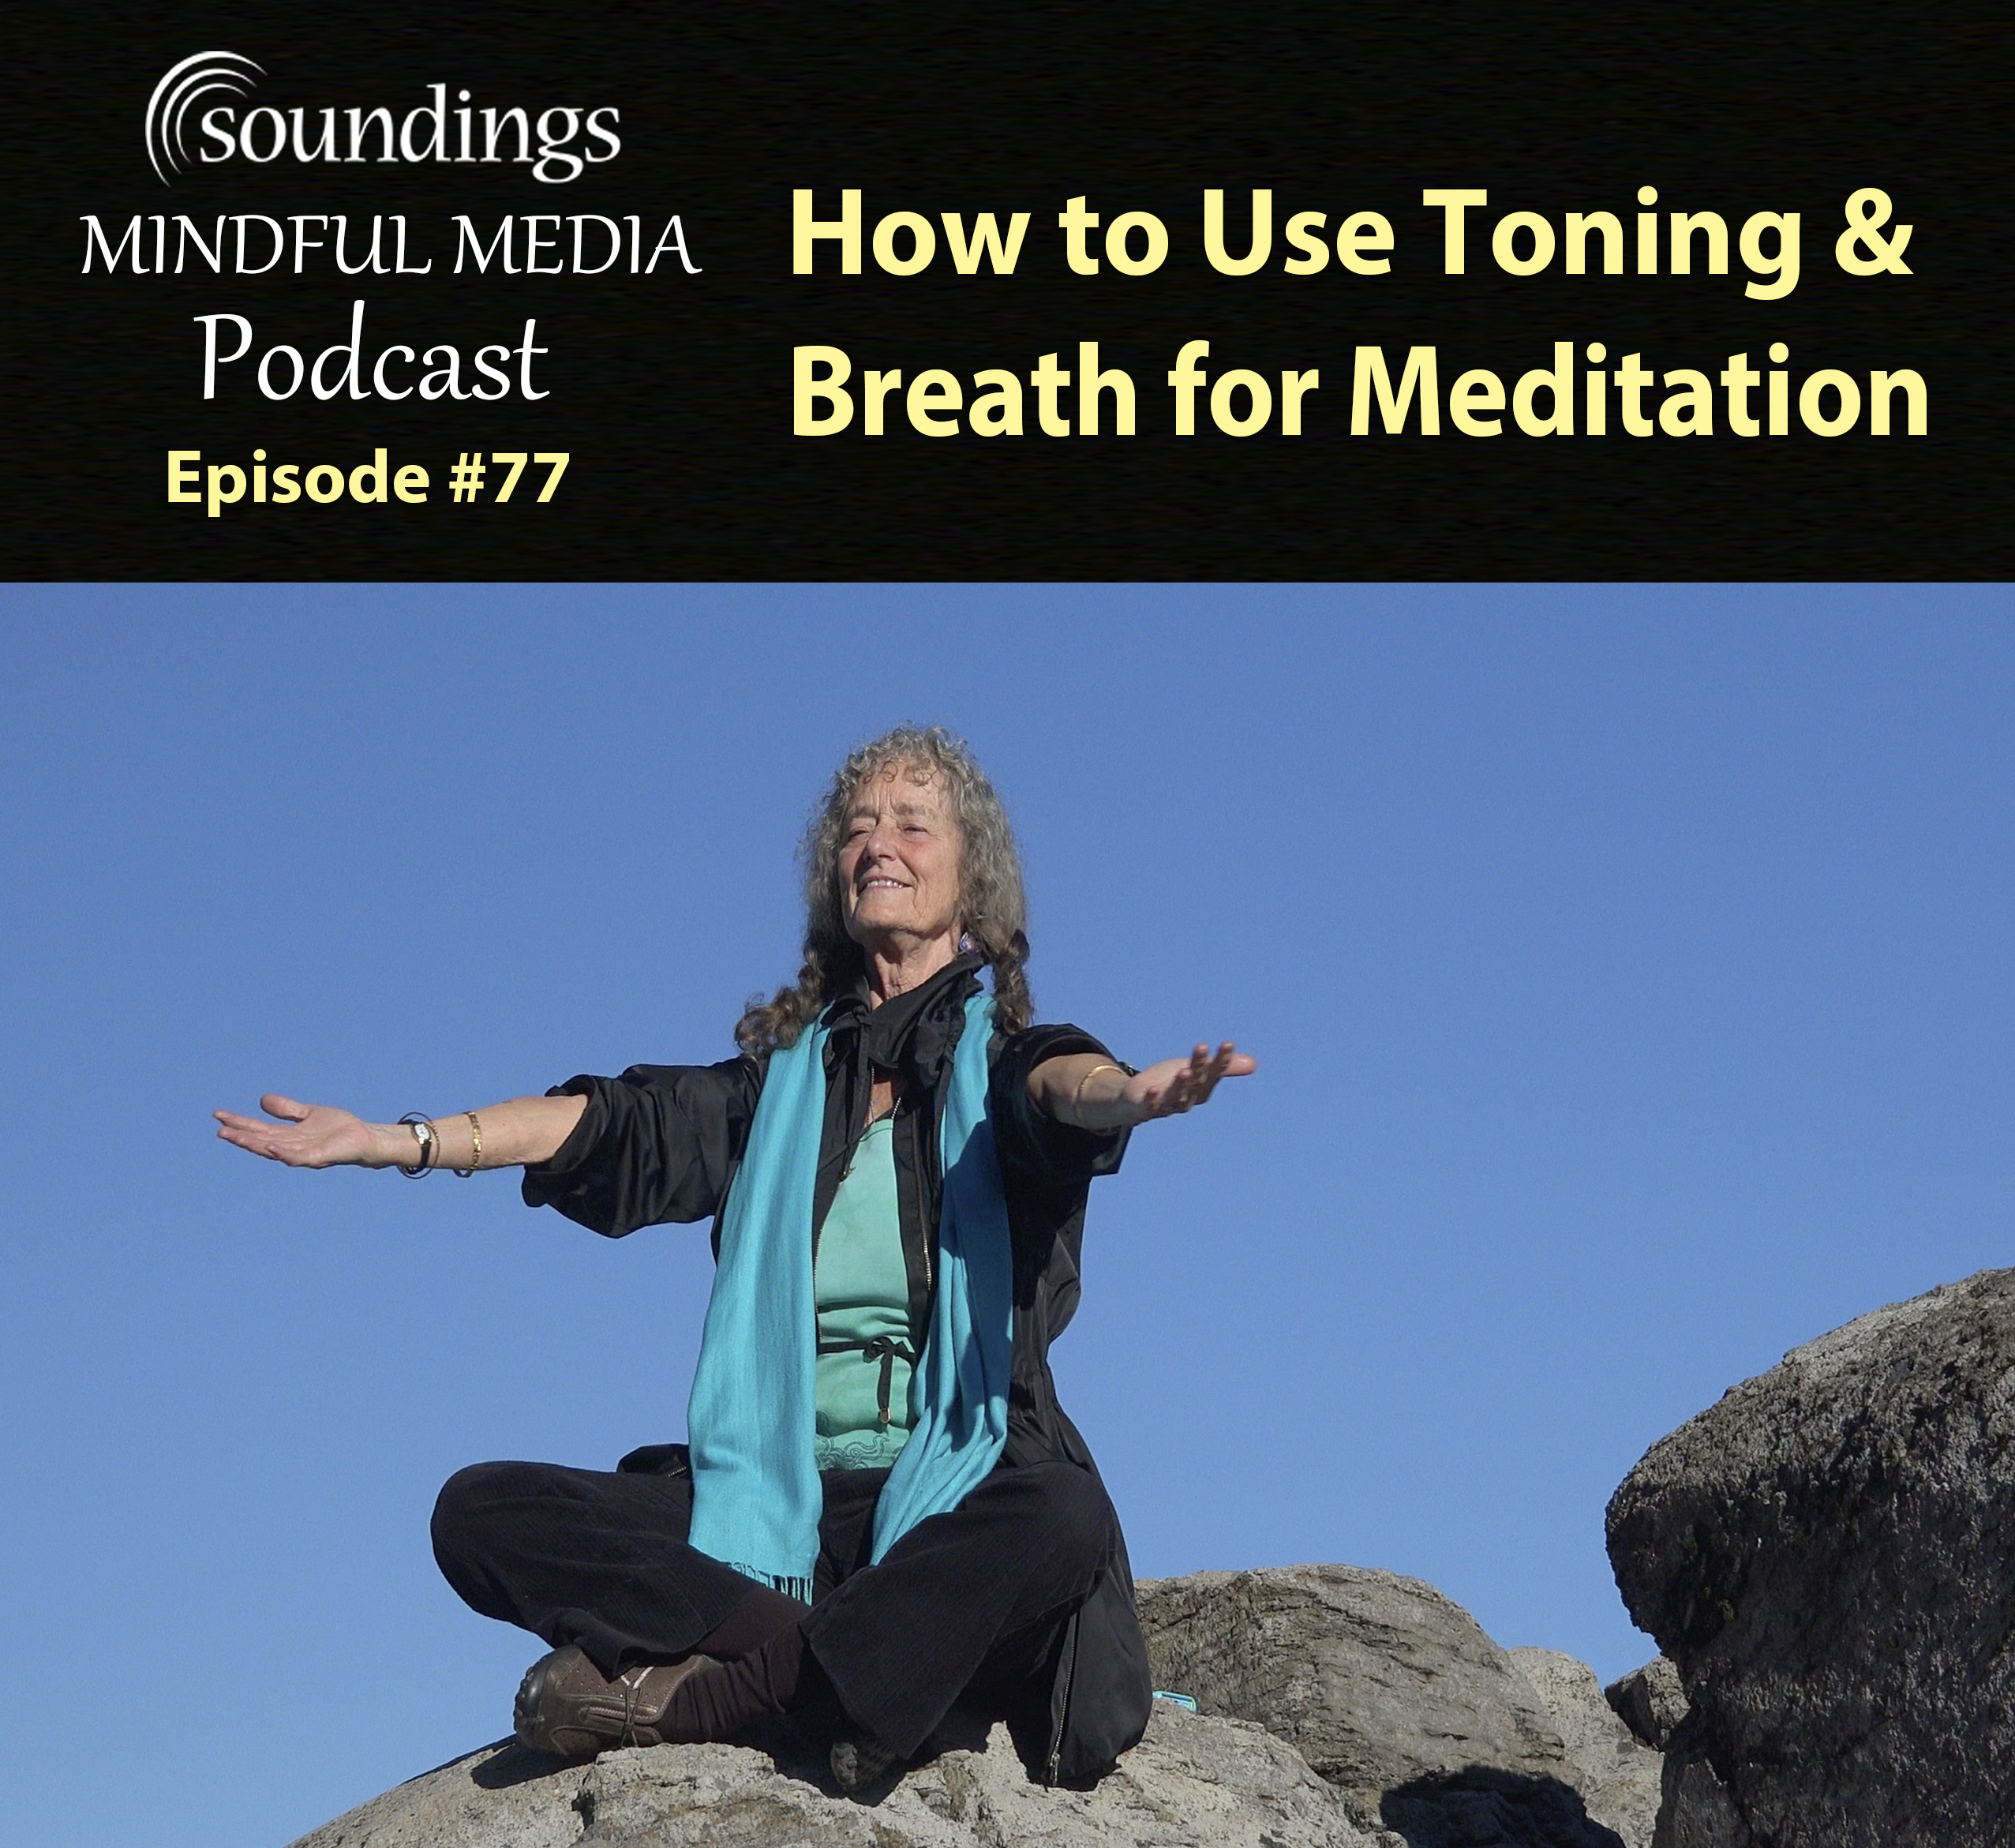 How to Use Toning & Breath for Meditation